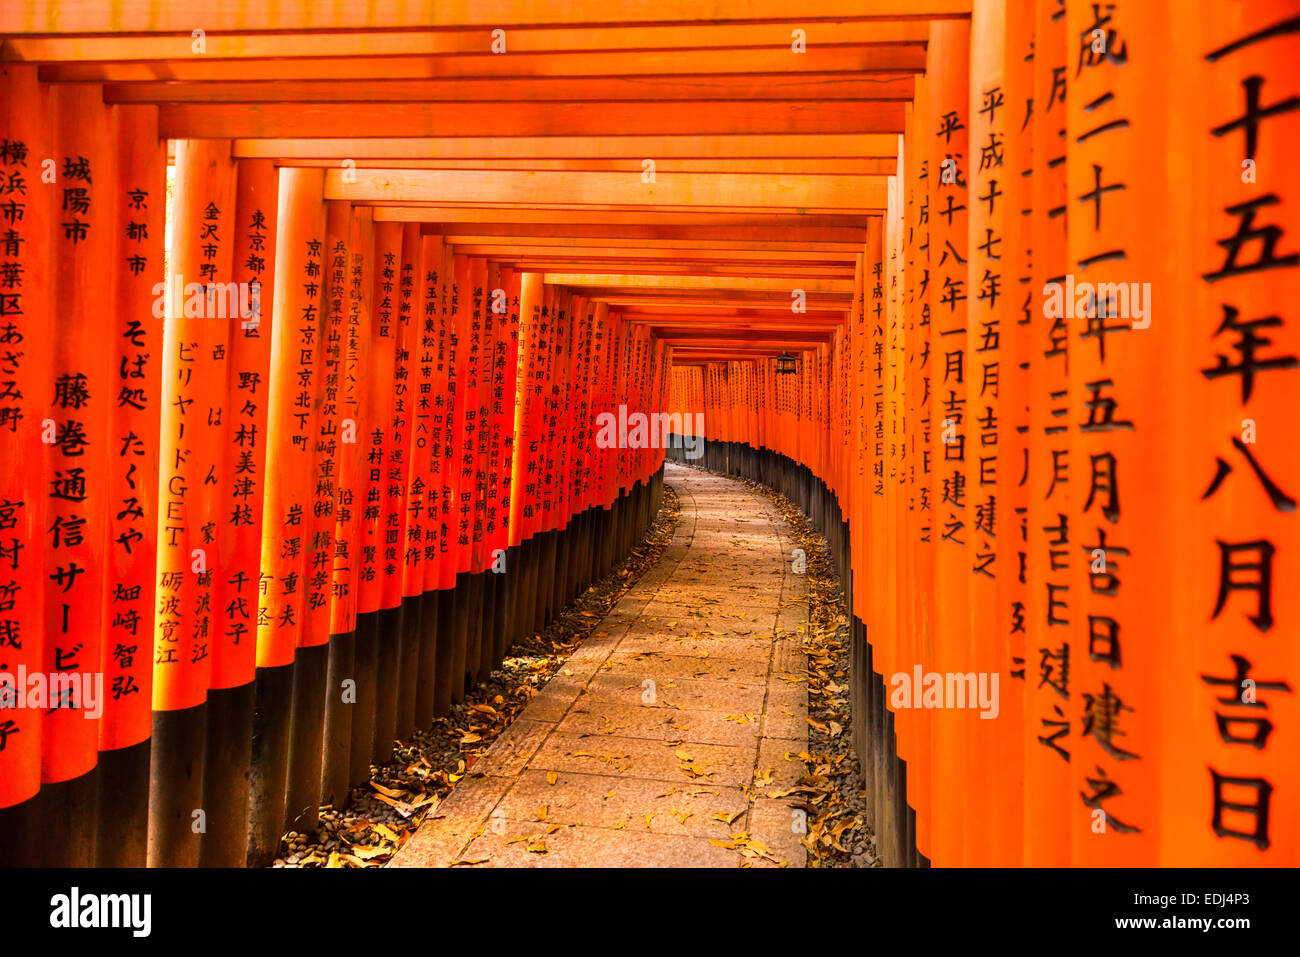 Fushimi Inari Inscription High Resolution Stock Photography And Images Alamy